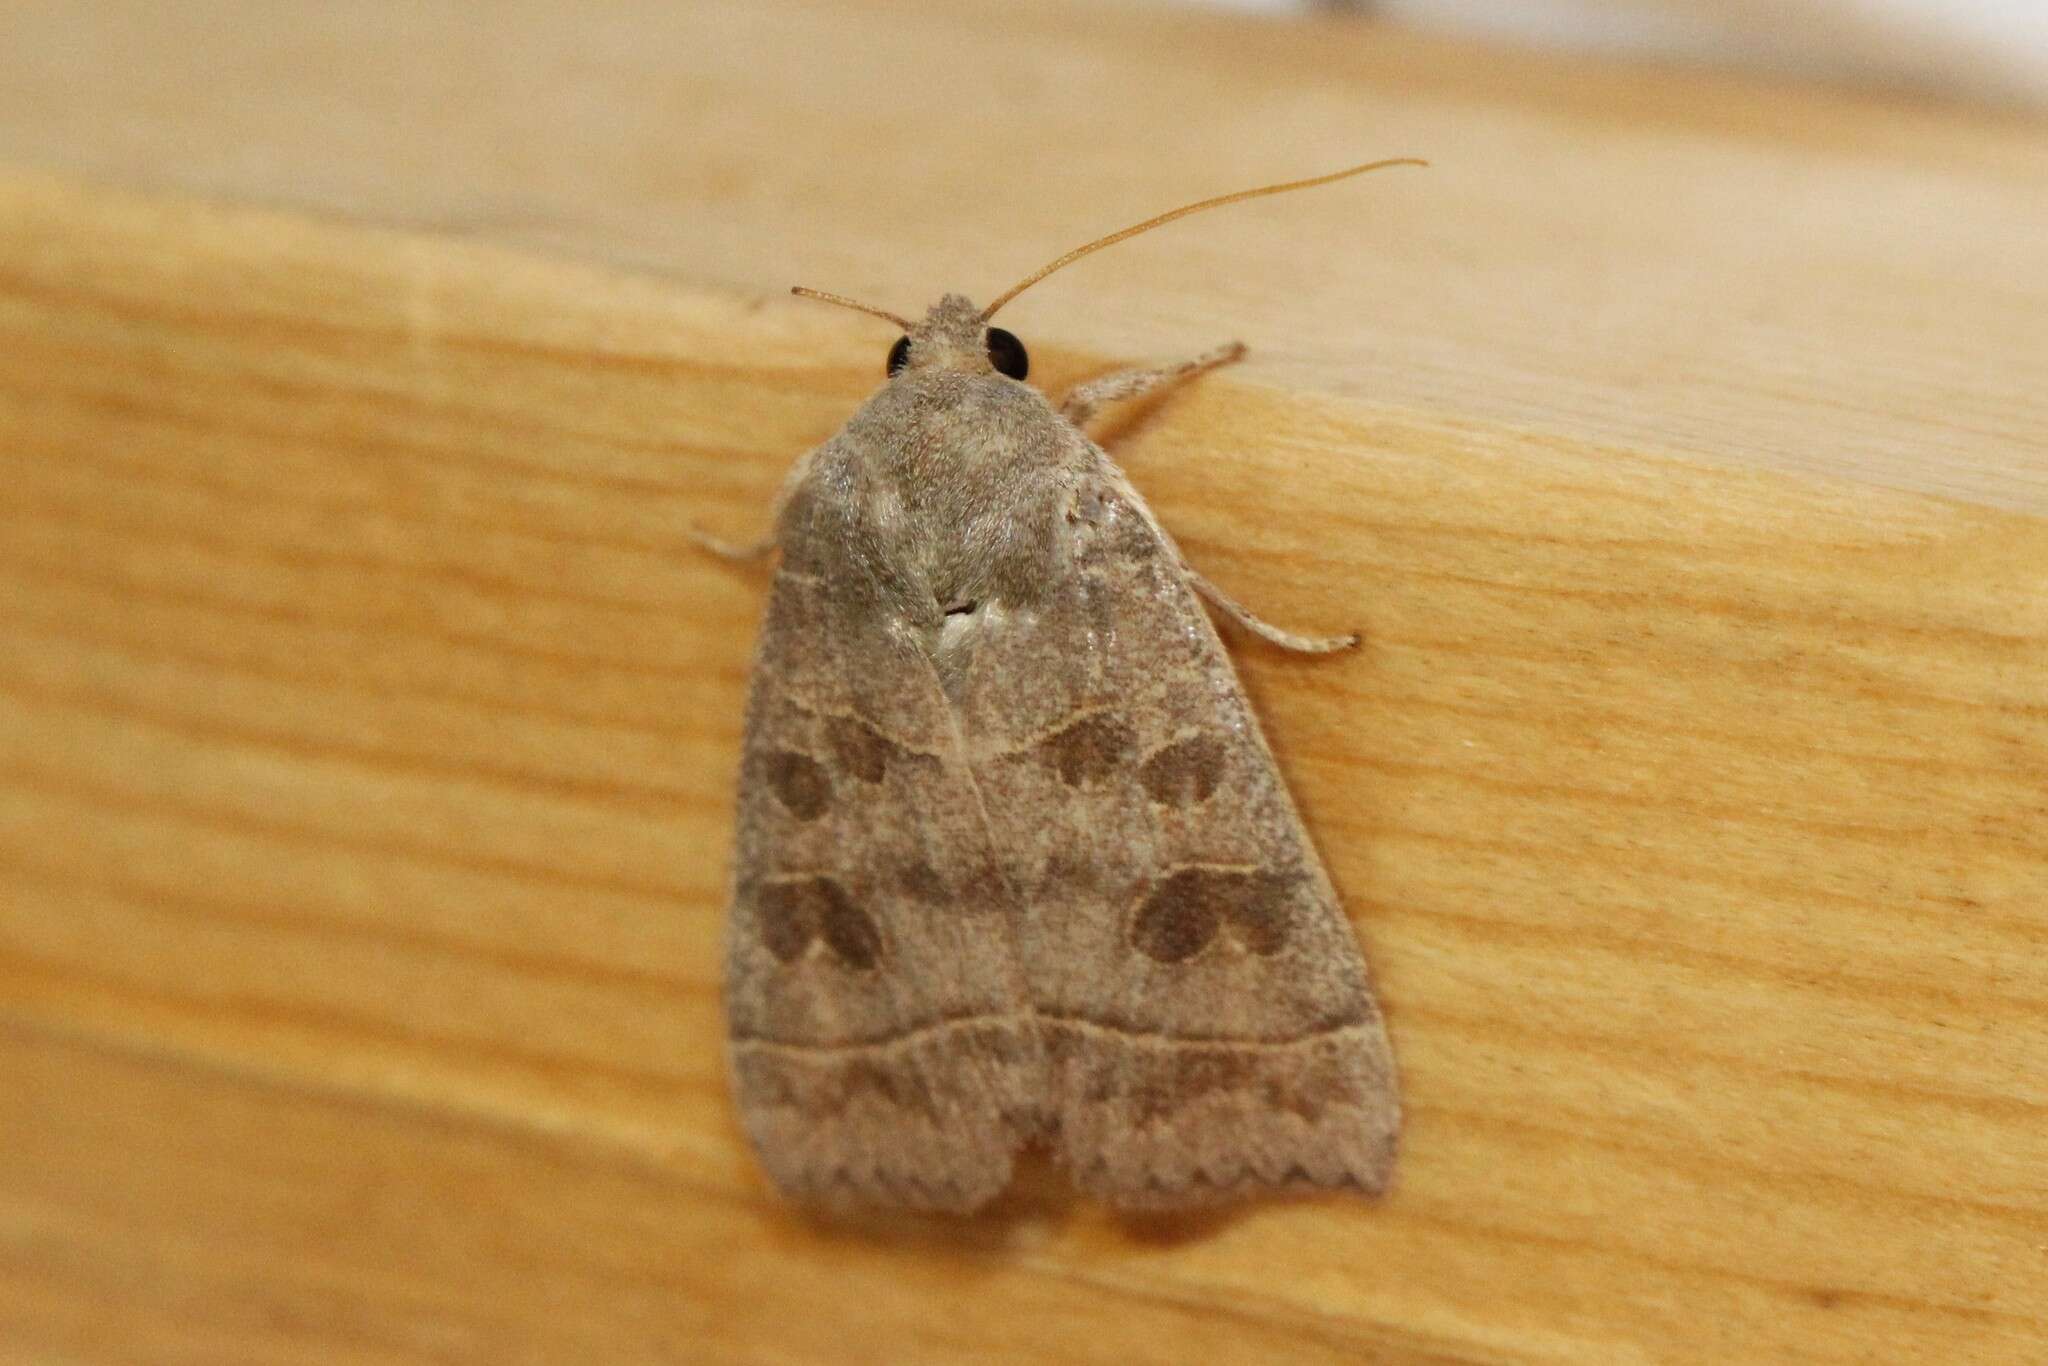 Image of Even-lined Sallow